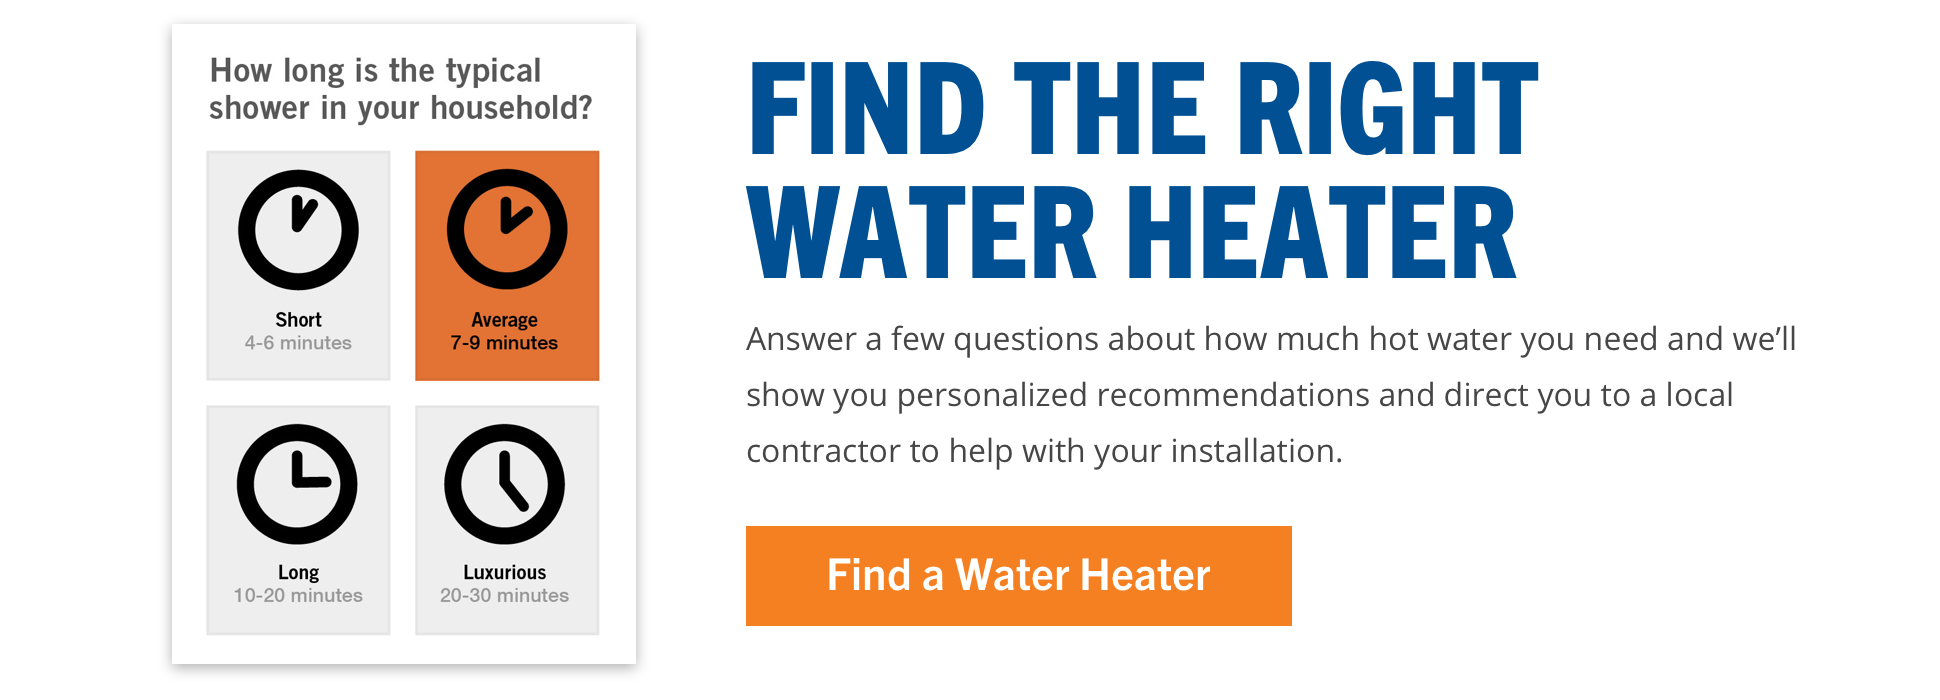 Water Heaters State Hot Water Heater Systems